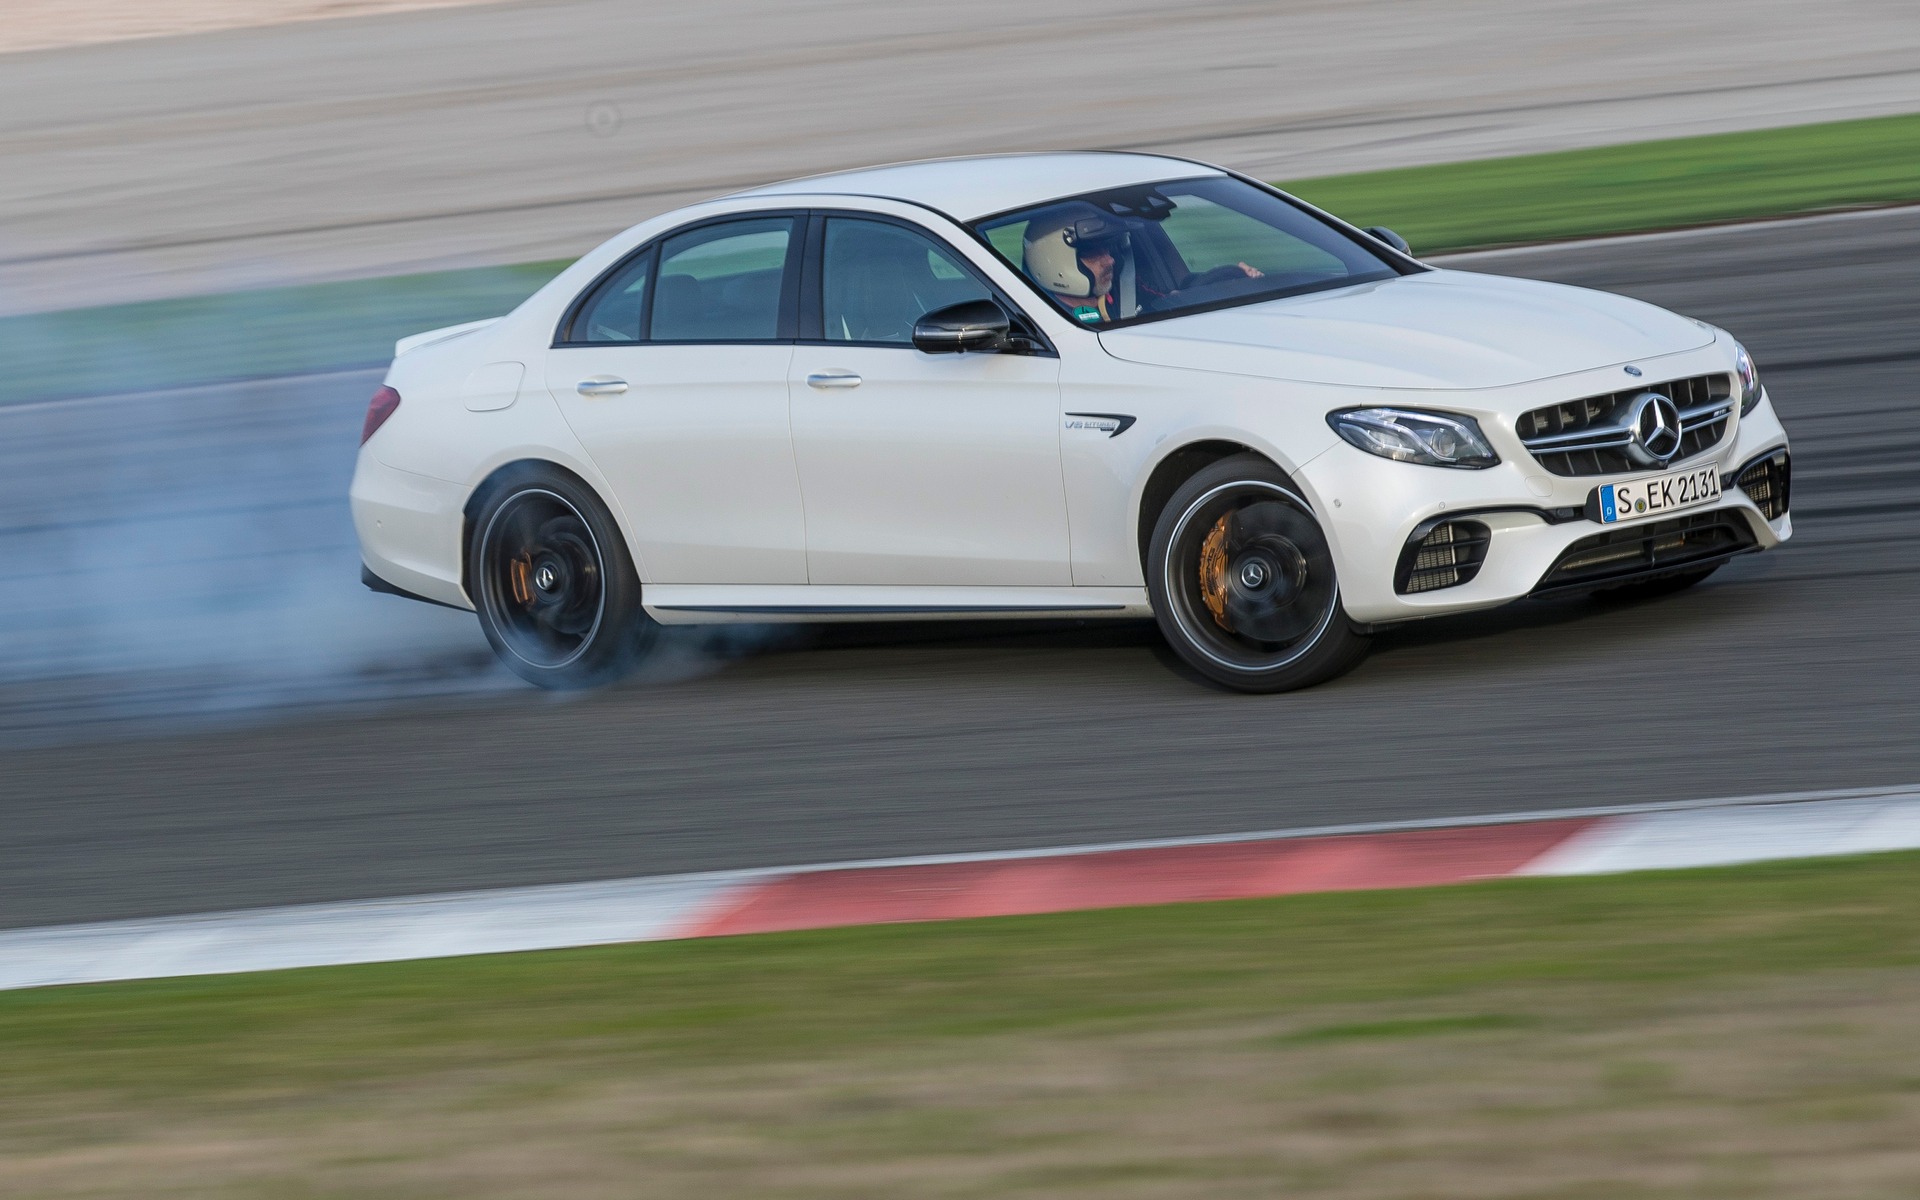 2018 Mercedes-AMG E 63 S 4MATIC+: The Sin of Pride - The Car Guide